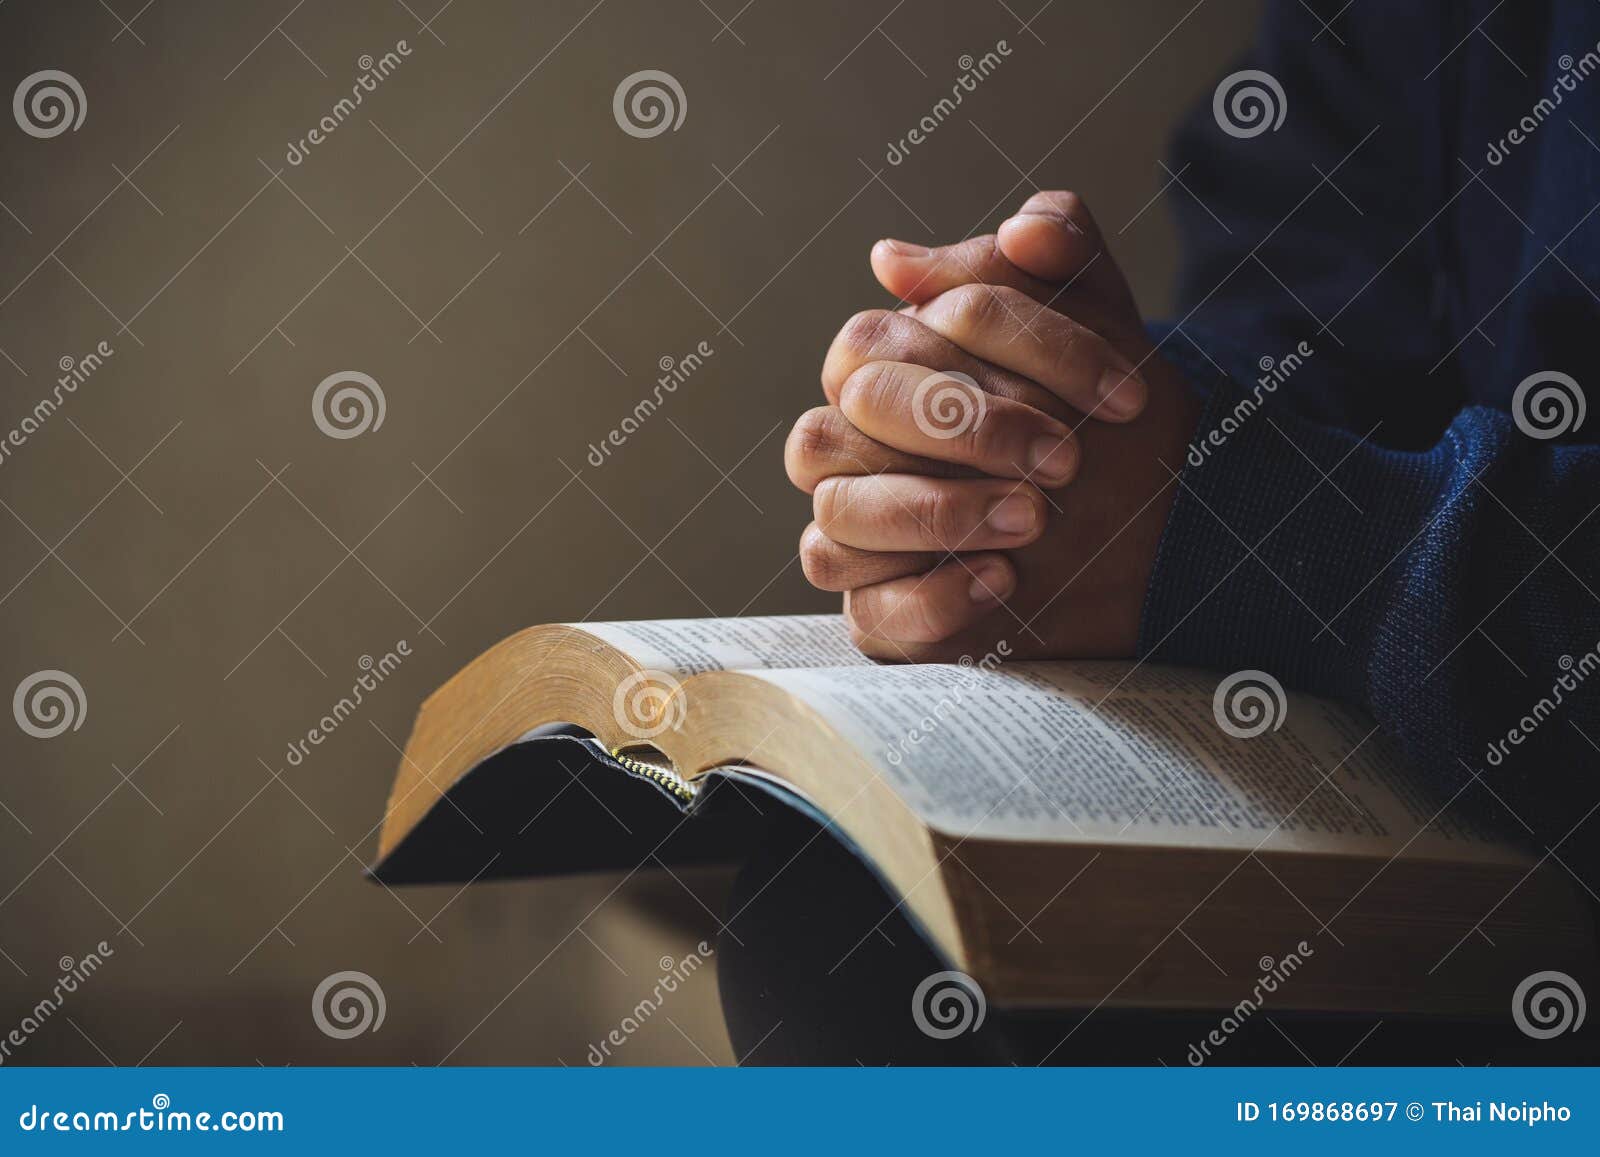 hands folded in prayer on a holy bible in church concept for faith